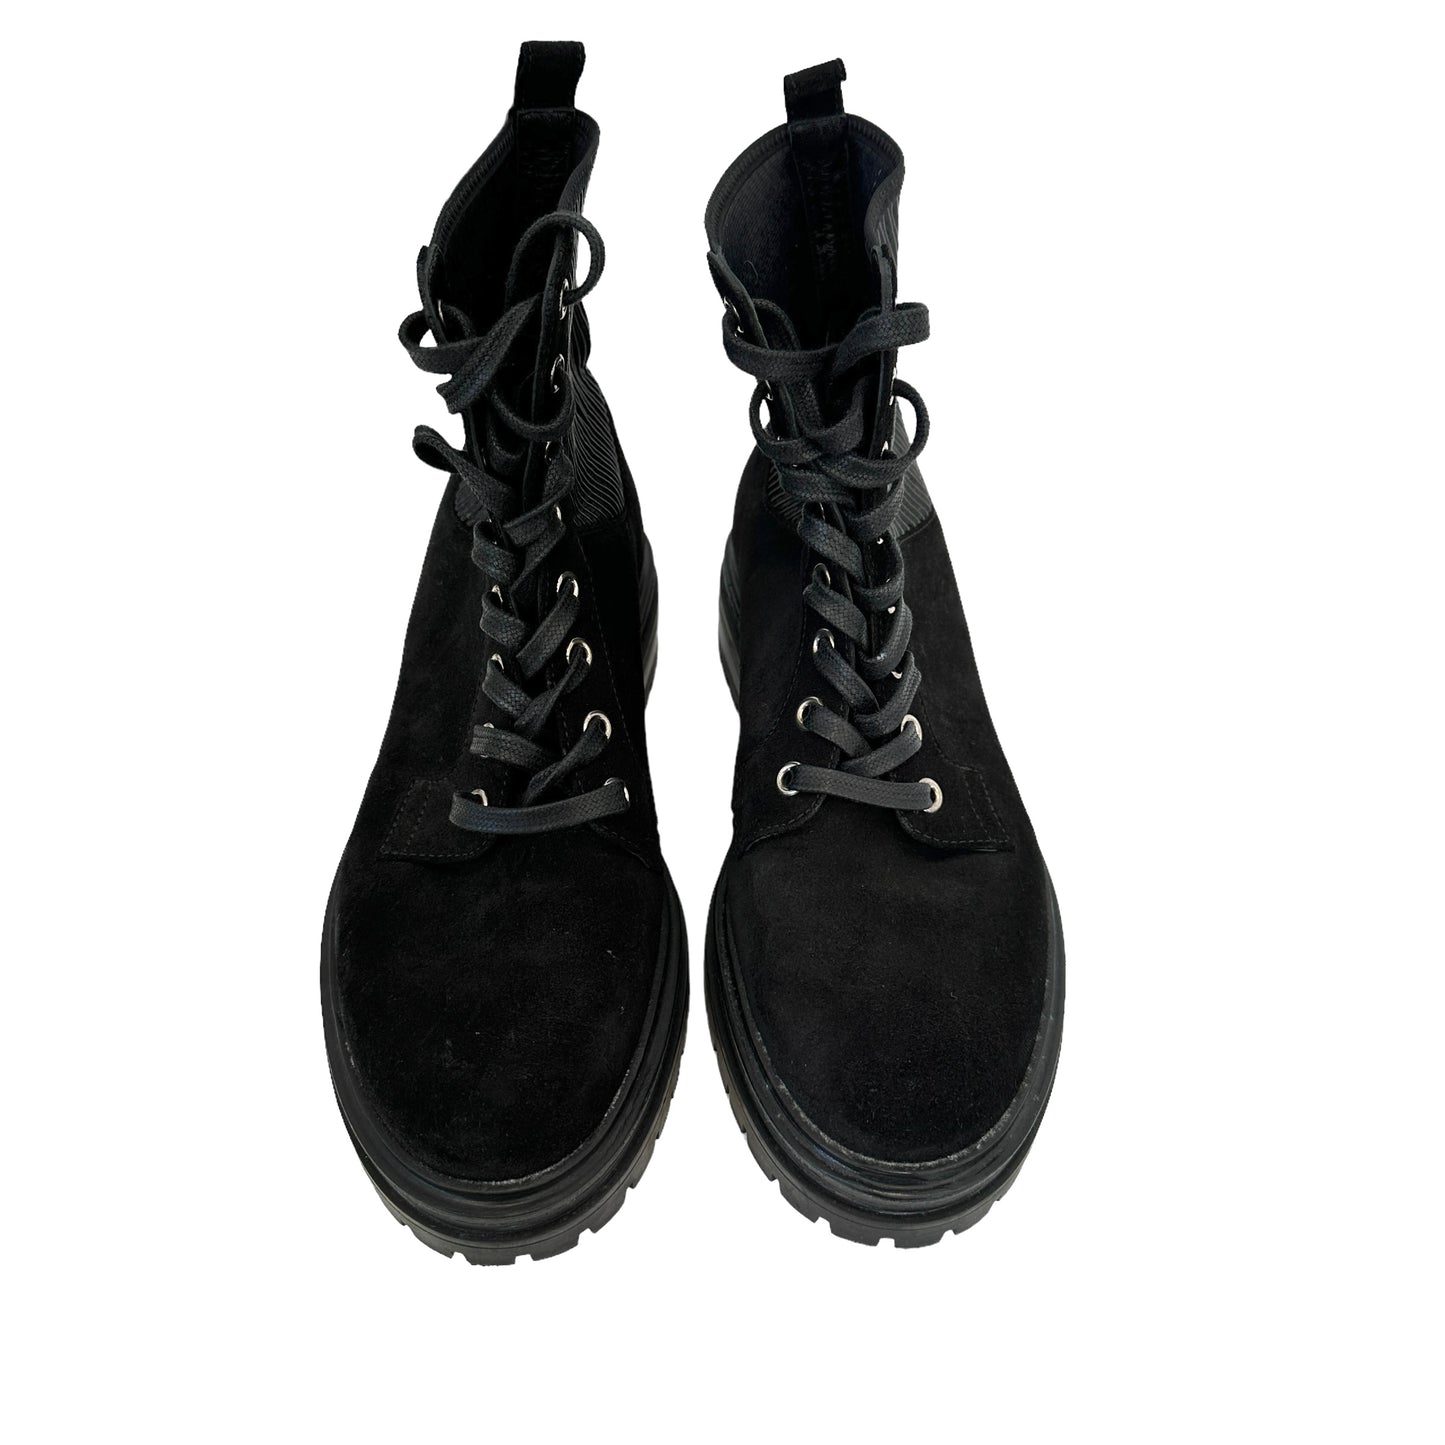 Black Leather & Suede Boots - 7.5